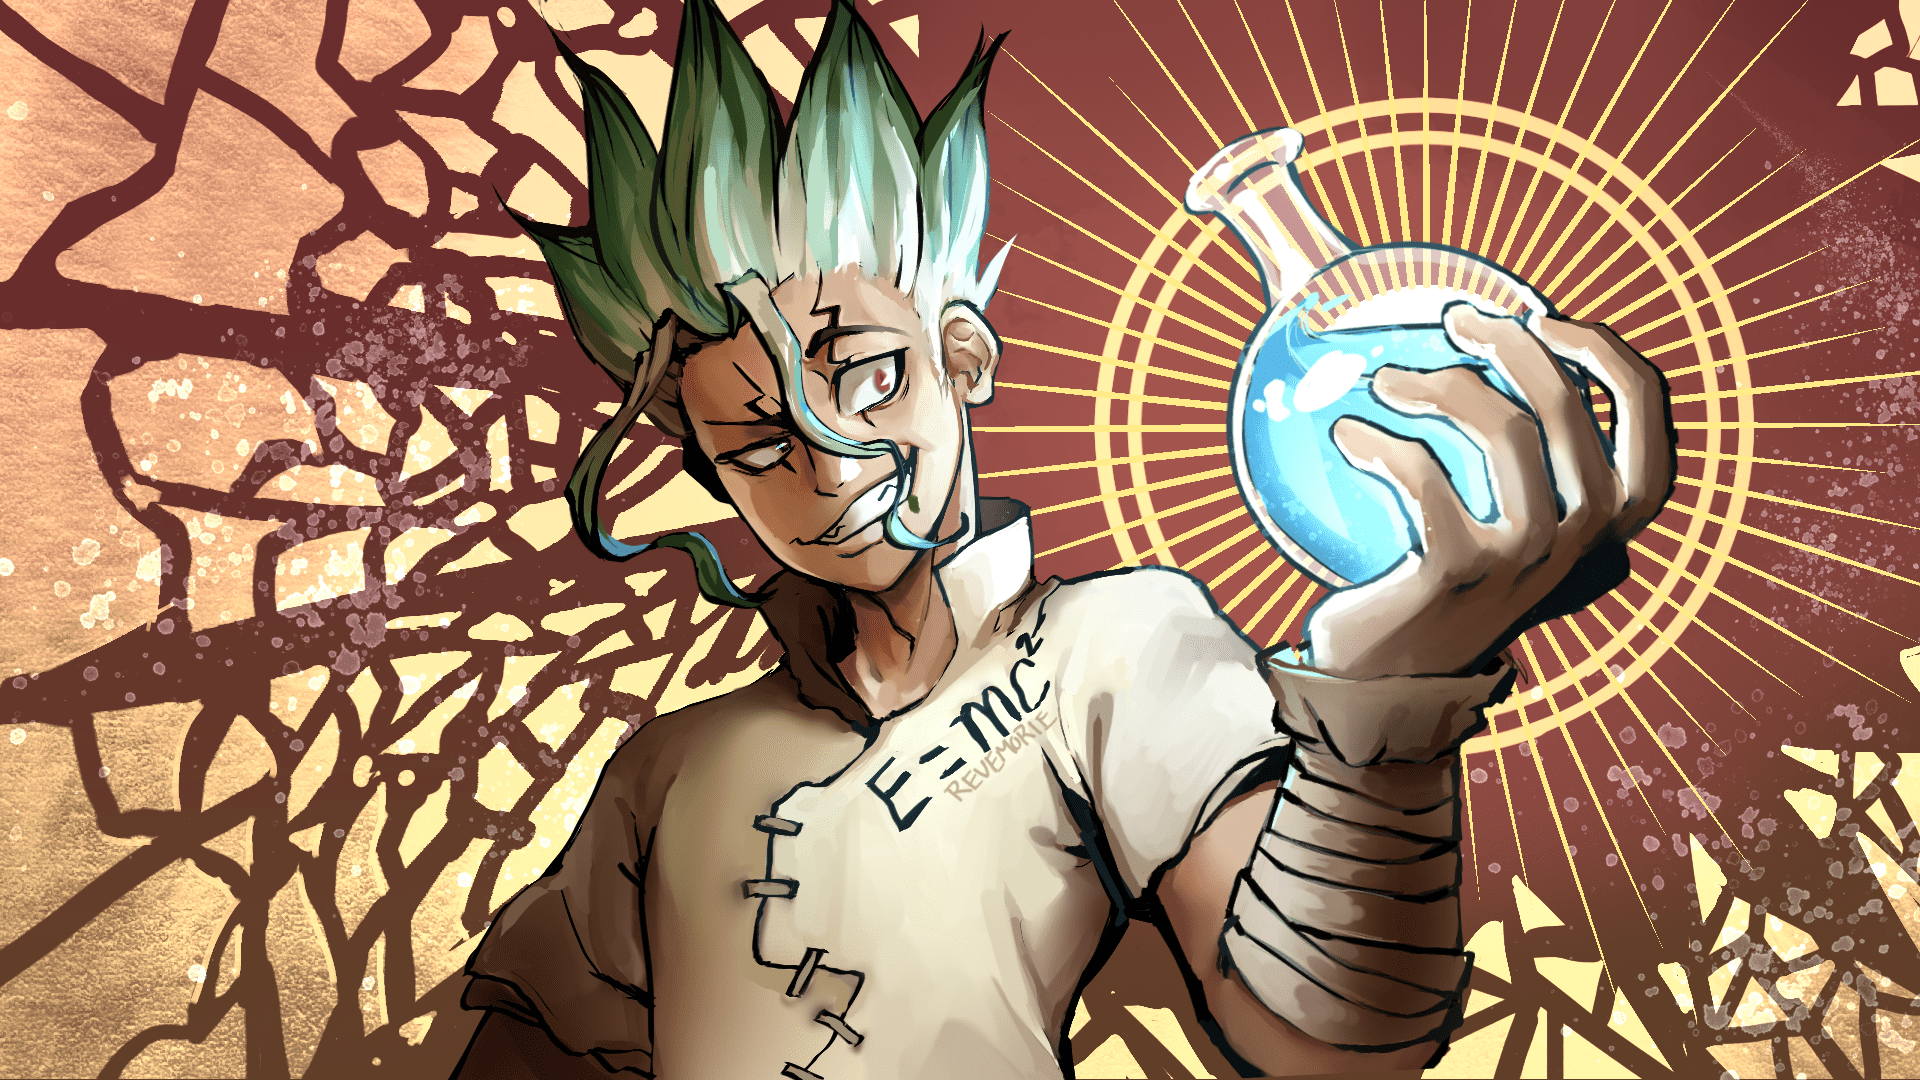 Dr. Stone Wallpaper For Pc.